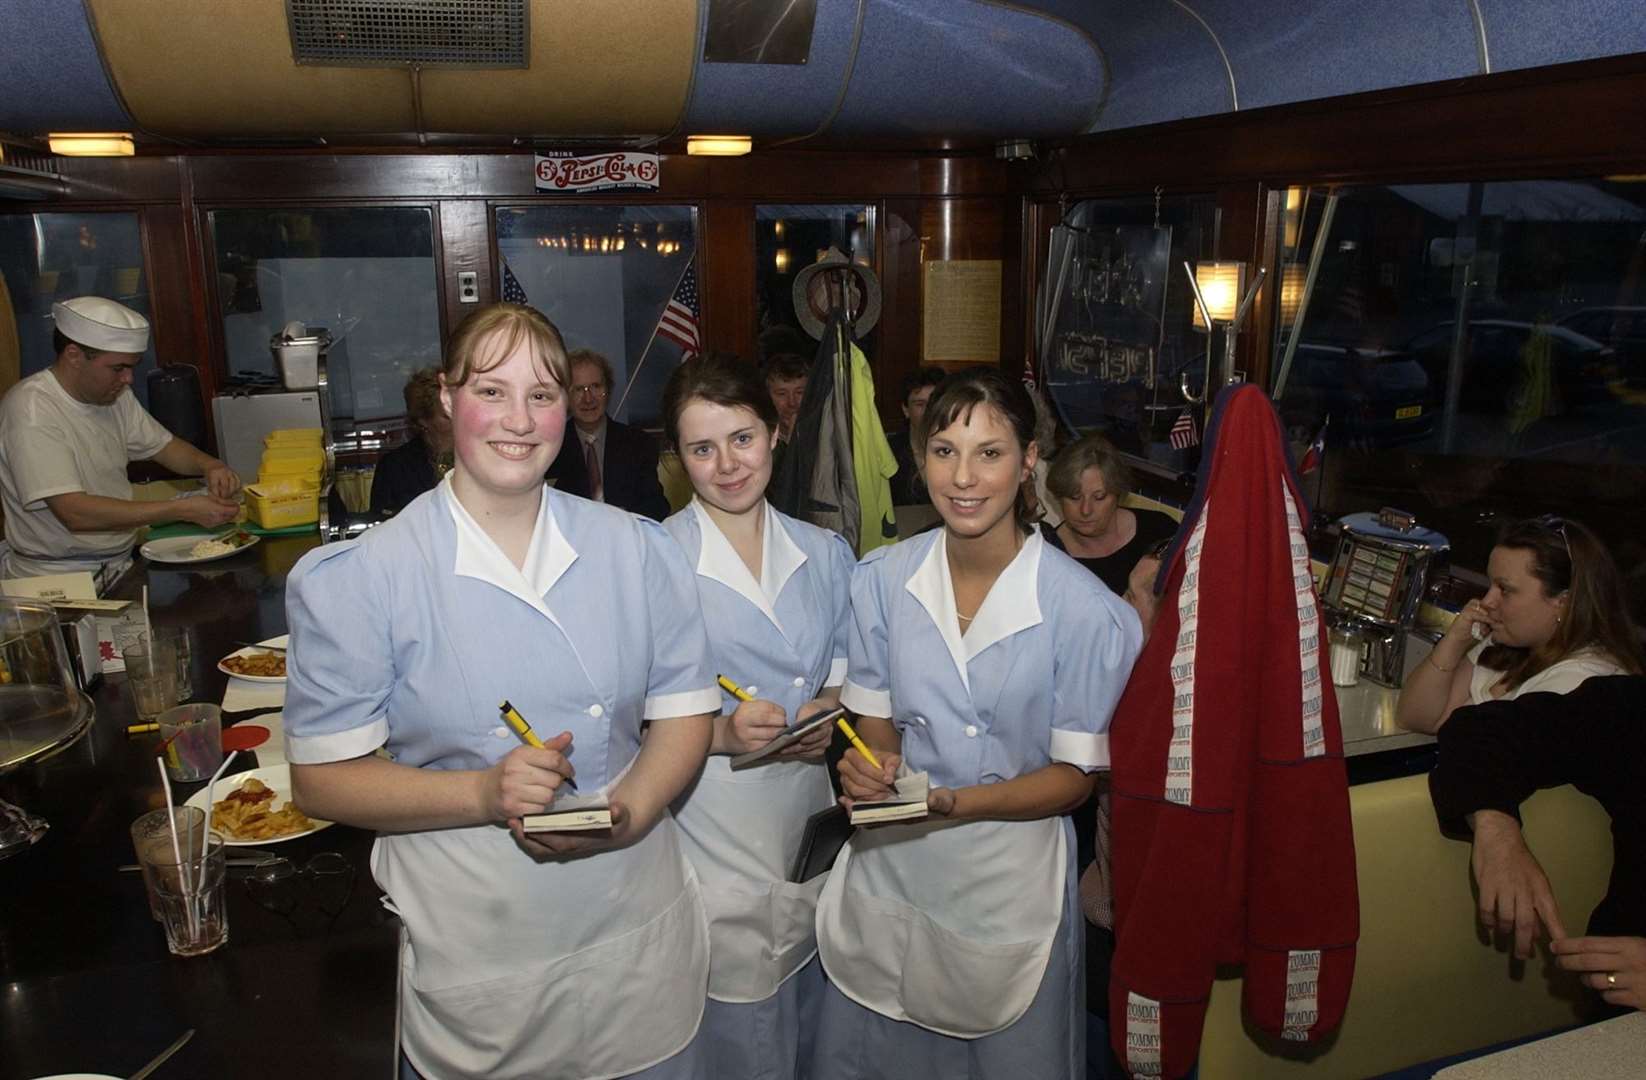 Waitresses Tania Neaves, Kerry Pittock and Liz Nichols at the previous Kennington diner in April 2002